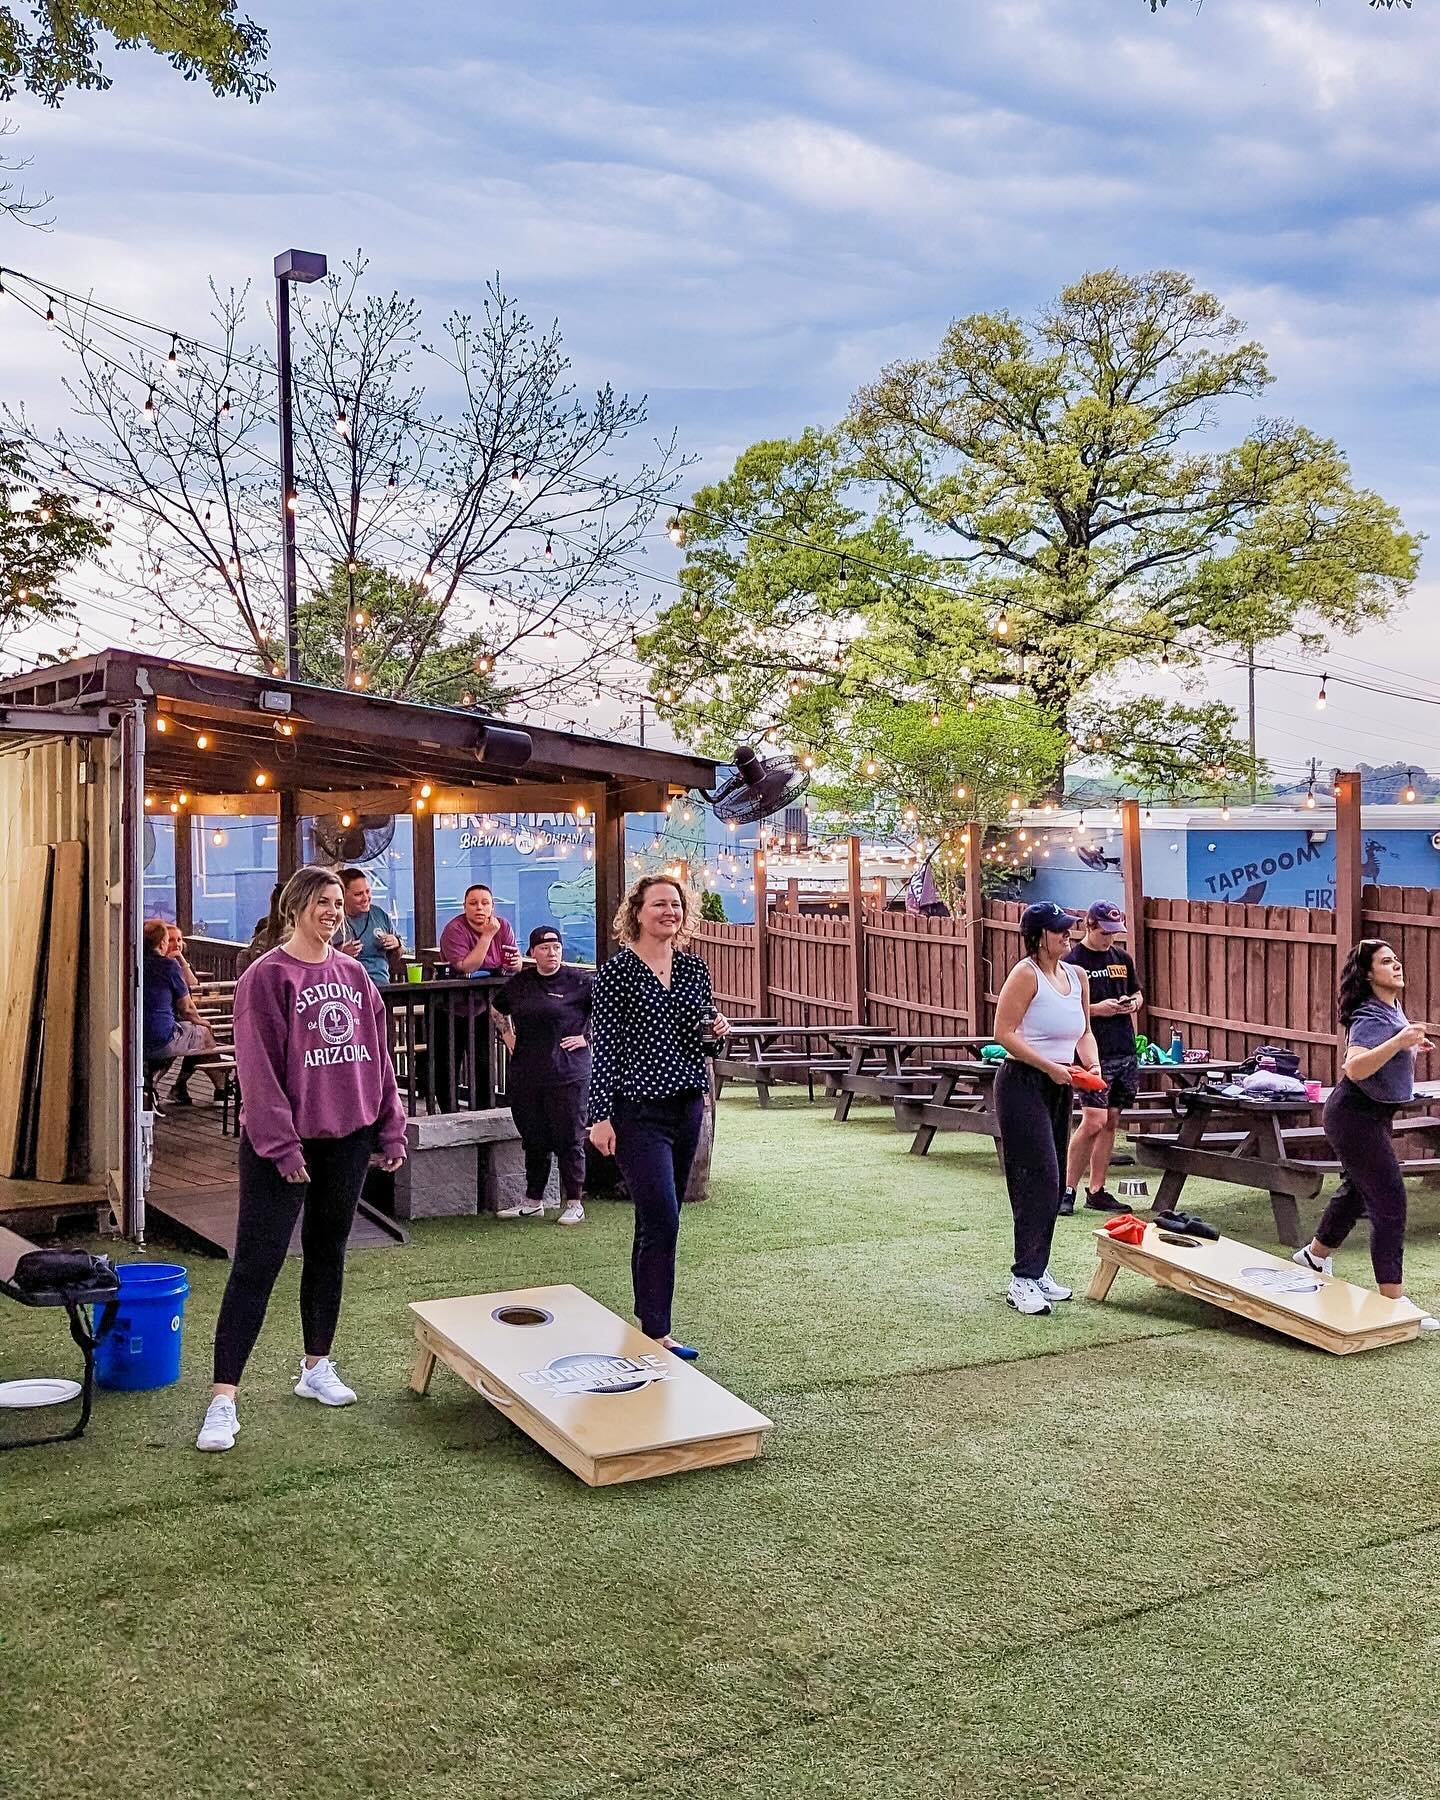 Cornhole ATL Summer League is almost here! ☀️

Make cornhole your new Summer hobby with @cornholeatl Summer League at Fire Maker! 

Starting Monday June 3rd, experience 7 weeks of cornhole play with friends and family! Set up your team and register a